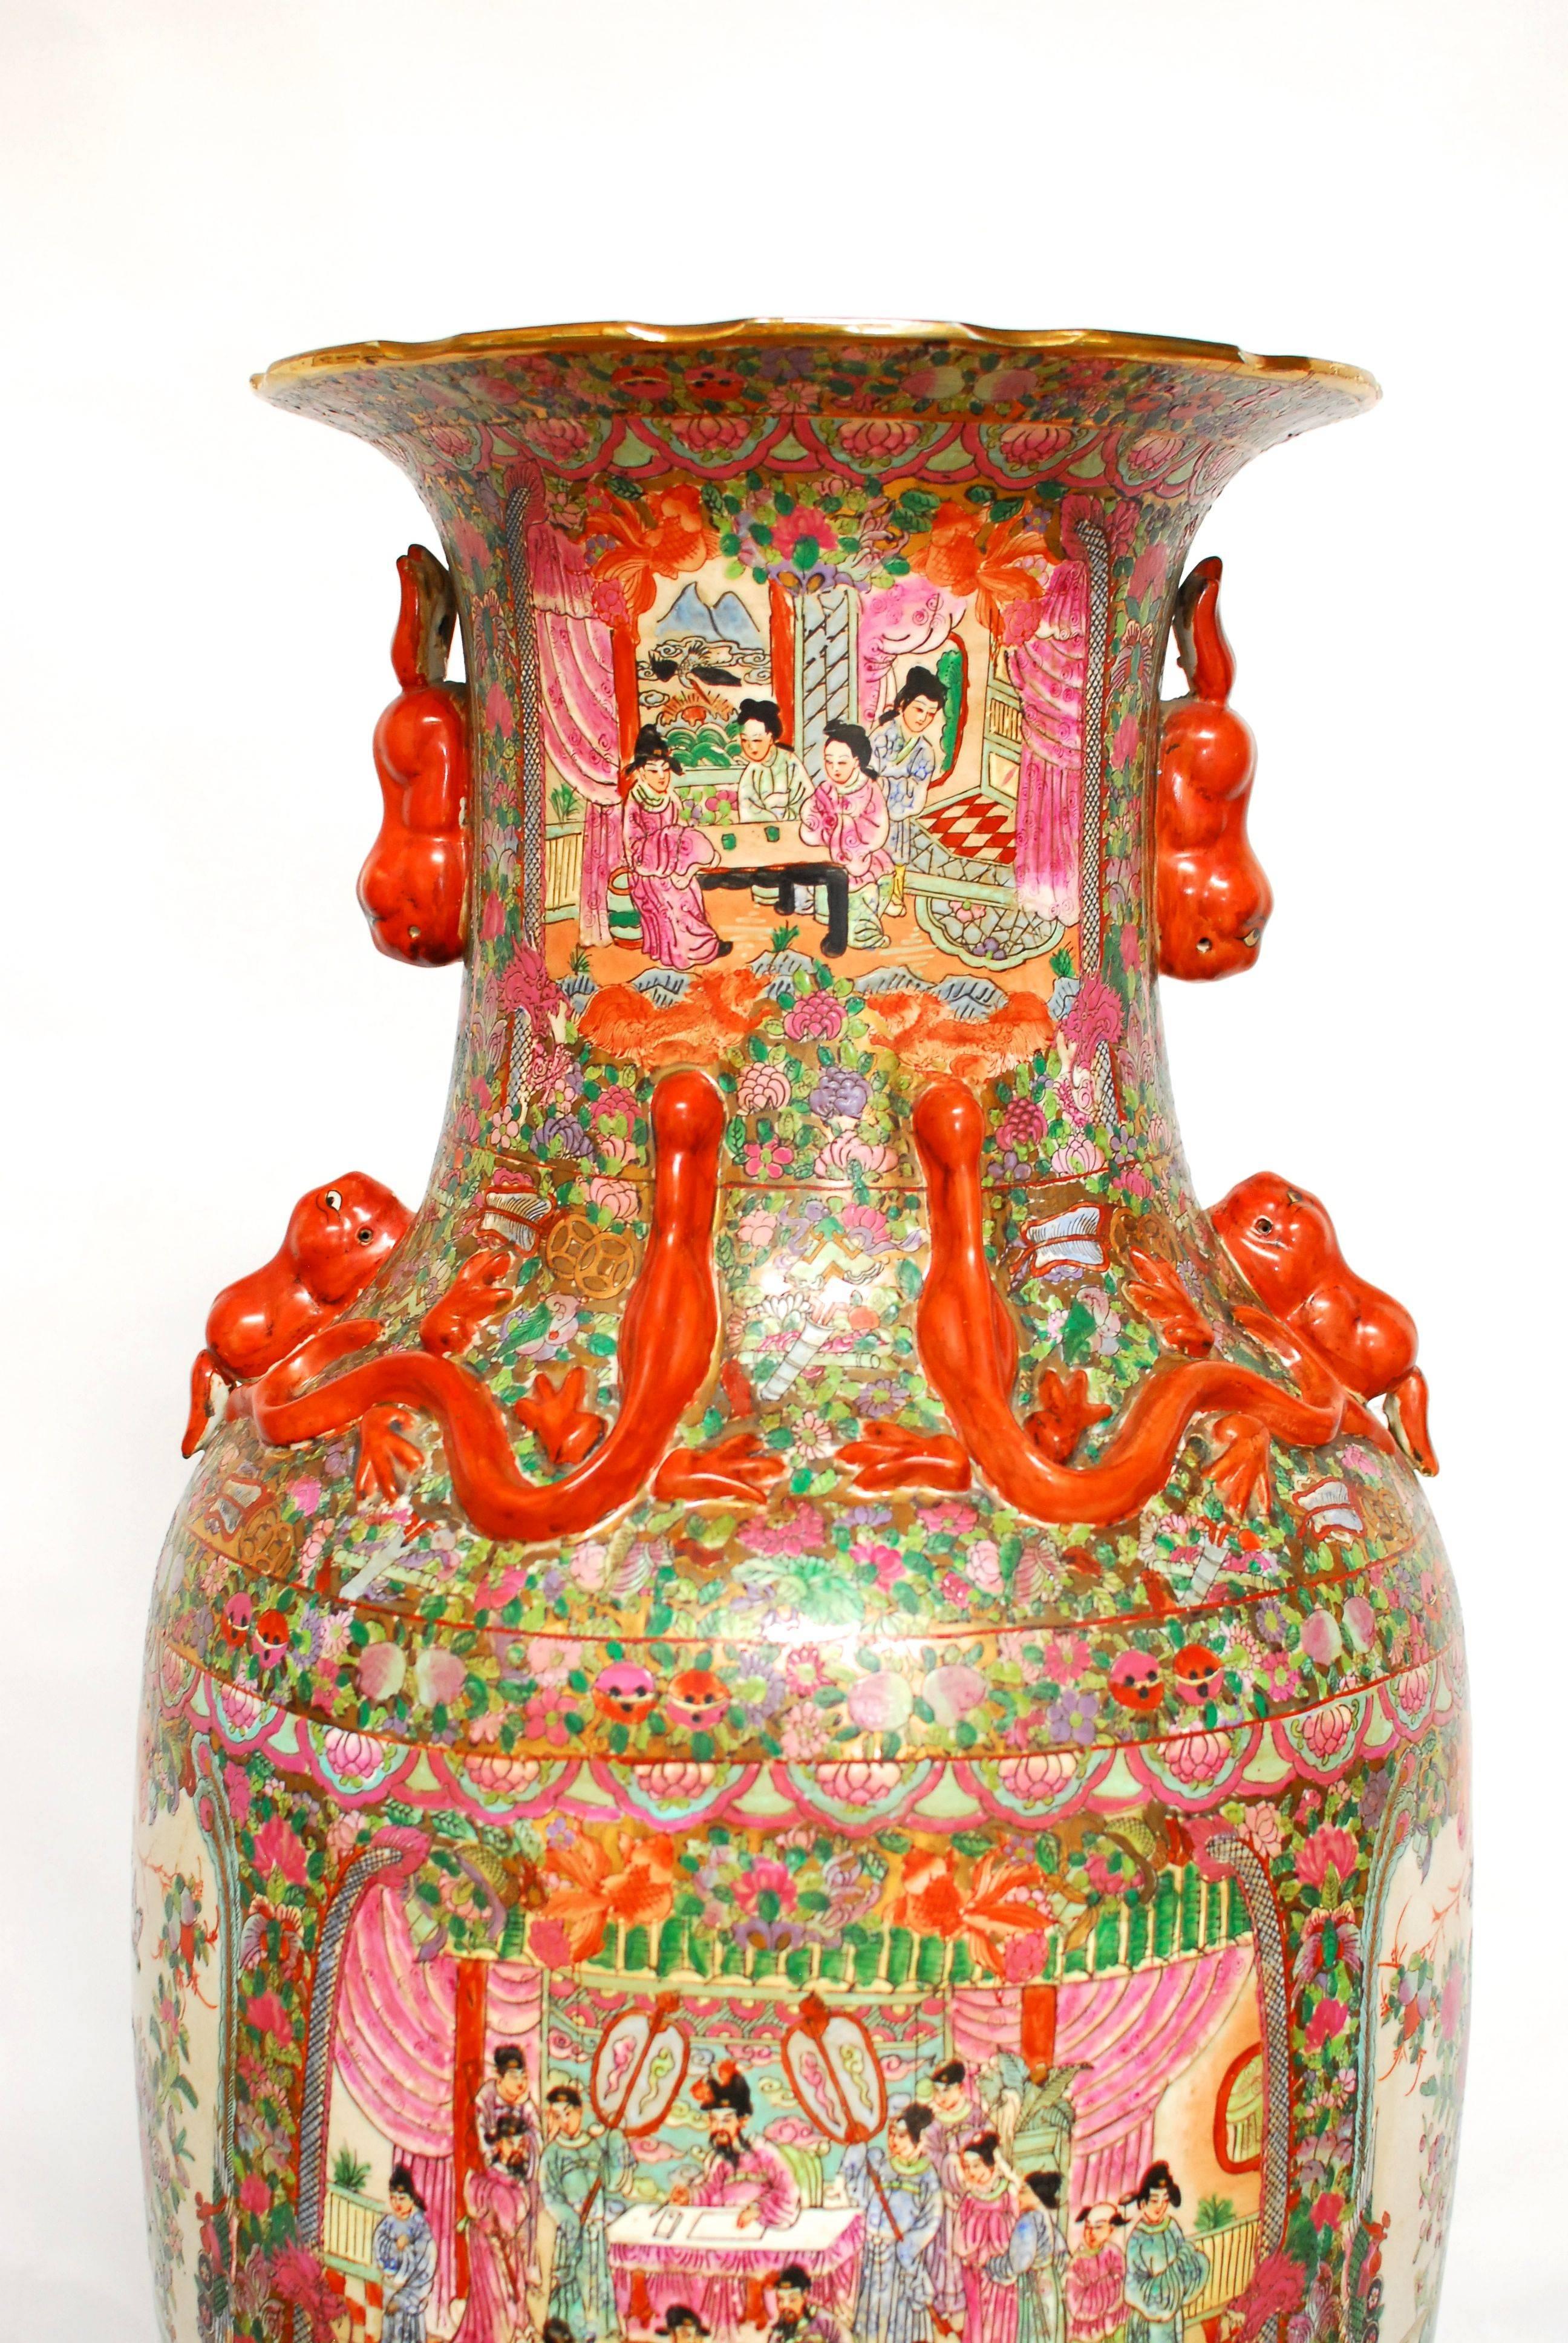 A monumental 19th century Chinese canton famille rose porcelain vase in a baluster shape with applied handles in the form of young temple foo dogs and lizards on the waisted neck. Numerous royal figures and court scenes on a highly decorated gilt